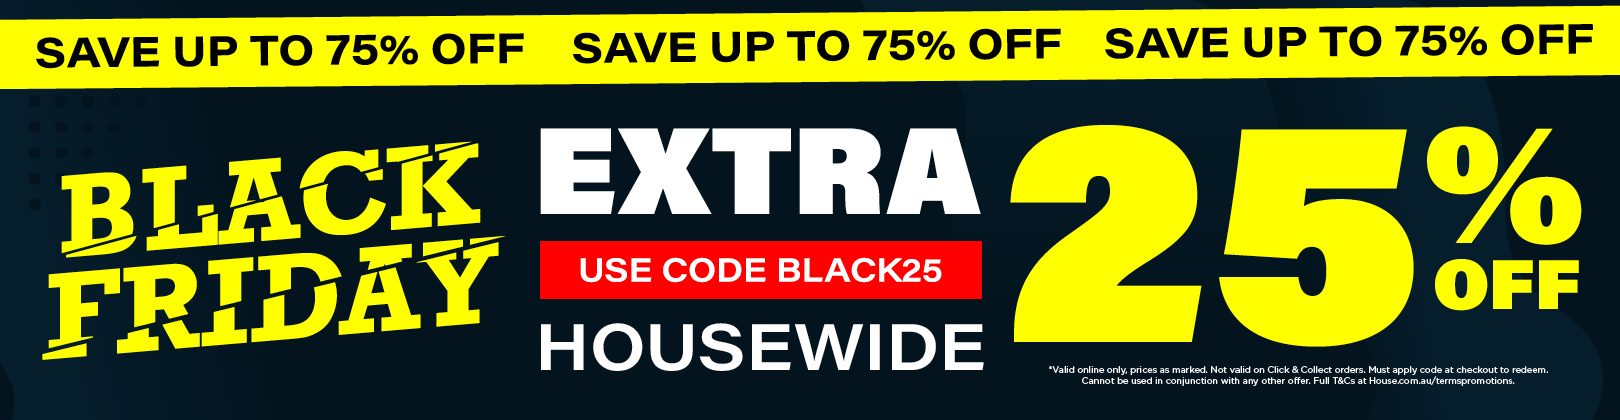 House Black Friday sale up to 75% OFF + extra 25% OFF with coupon. Save on cutlery, knives, & more